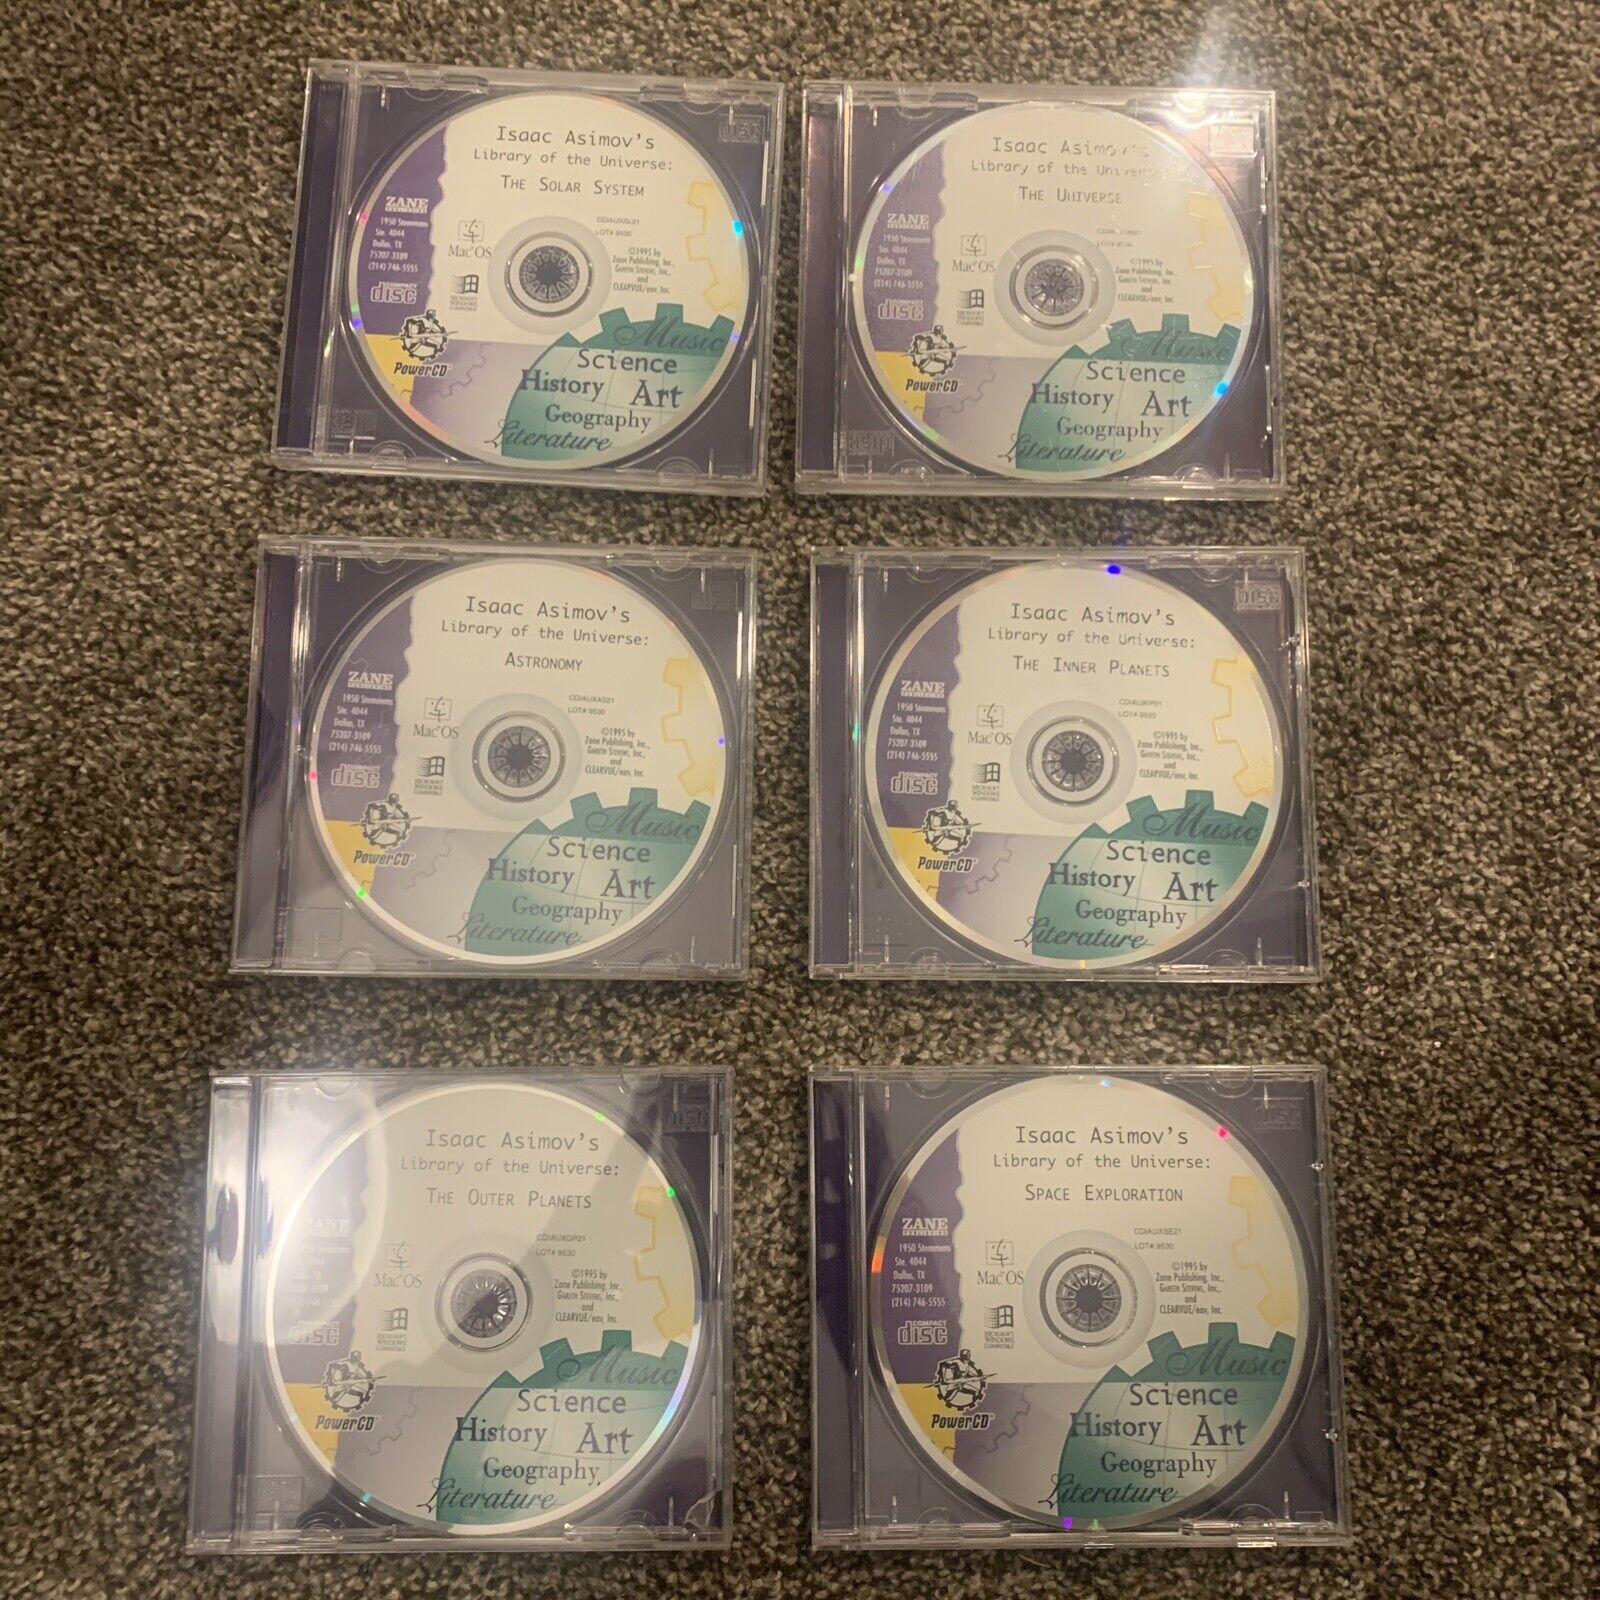 A FULL COLLECTION of 6 CD-ROMs of Isaac Asimov's Library Of The Universe.